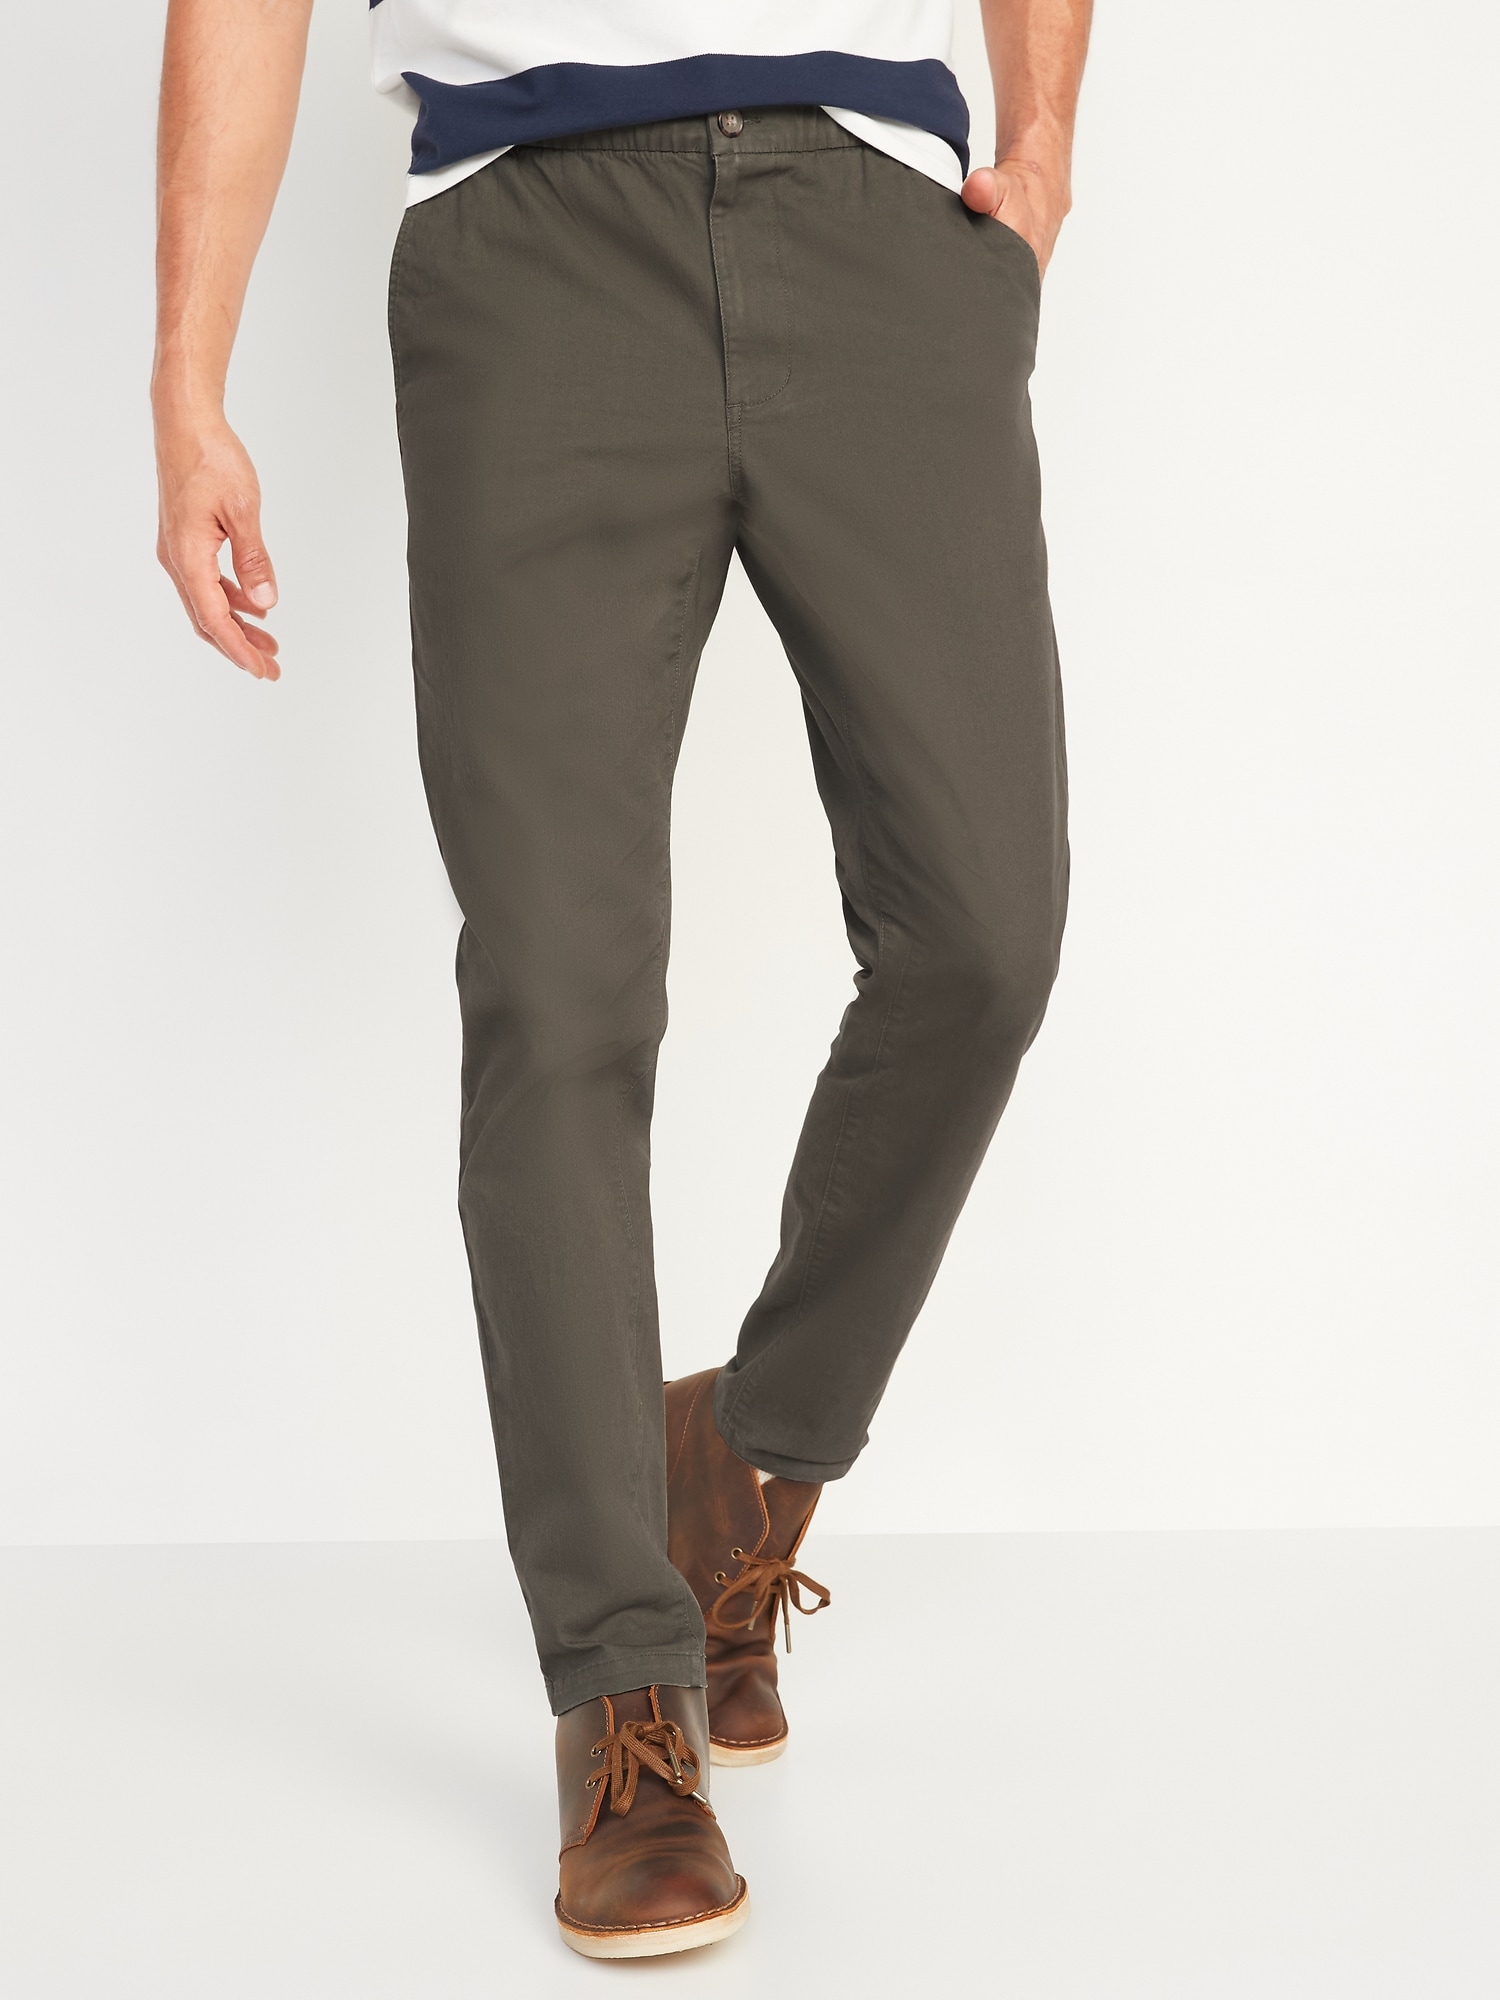 Slim Taper Built-In Flex Pull-On Chino Pants | Old Navy